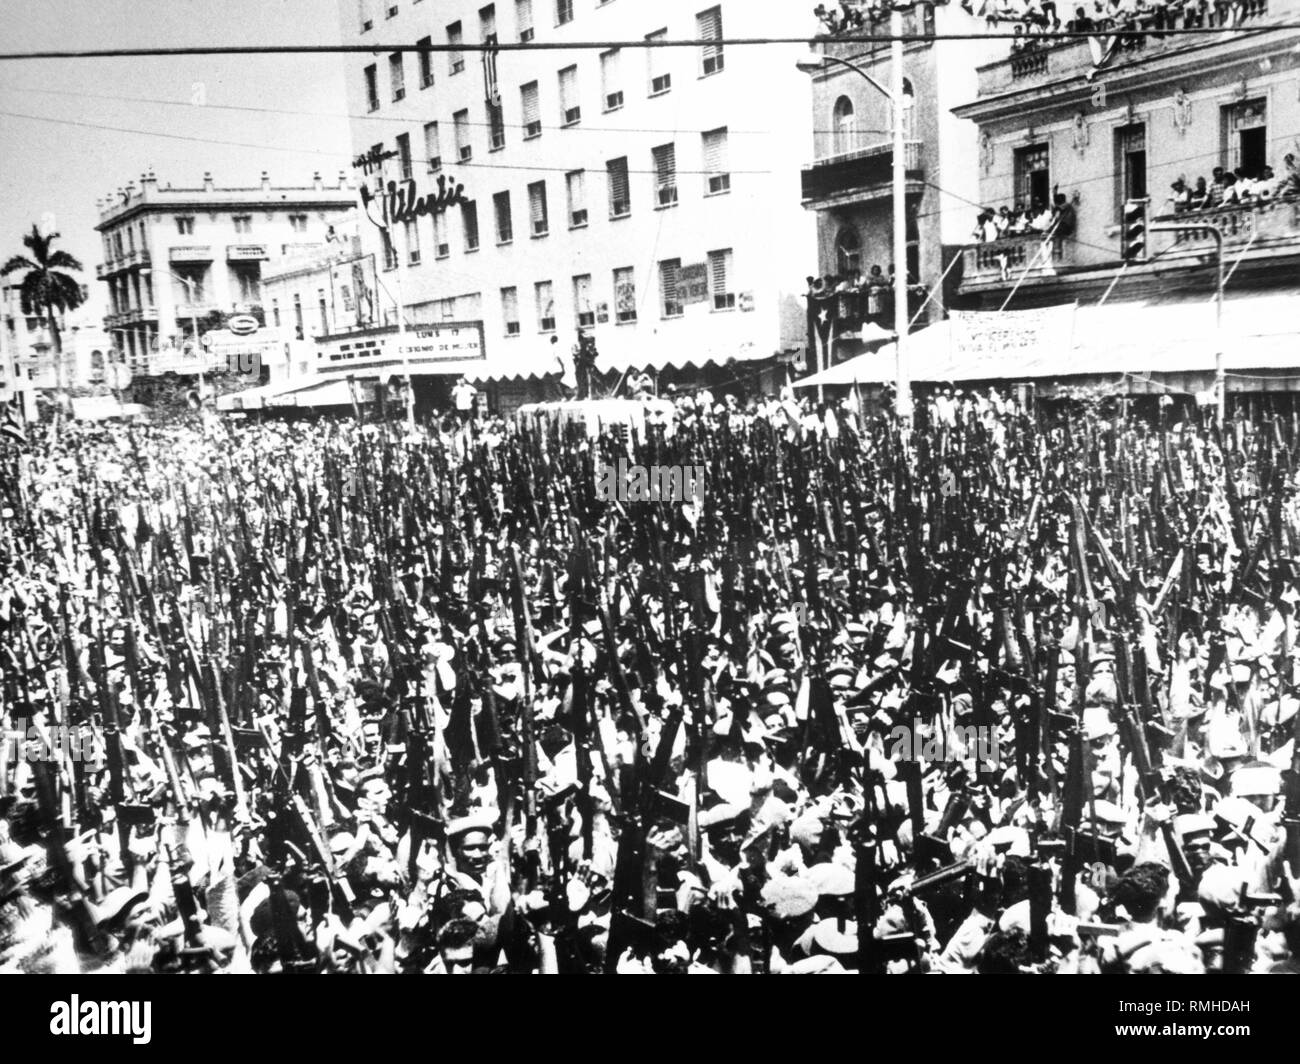 A few days before the Bay of Pigs Invasion by Cuban exiles supported by the CIA, thousands of armed militiamen are marching past Fidel Castro to demonstrate to the world the lasting character of the Socialist revolution. Stock Photo